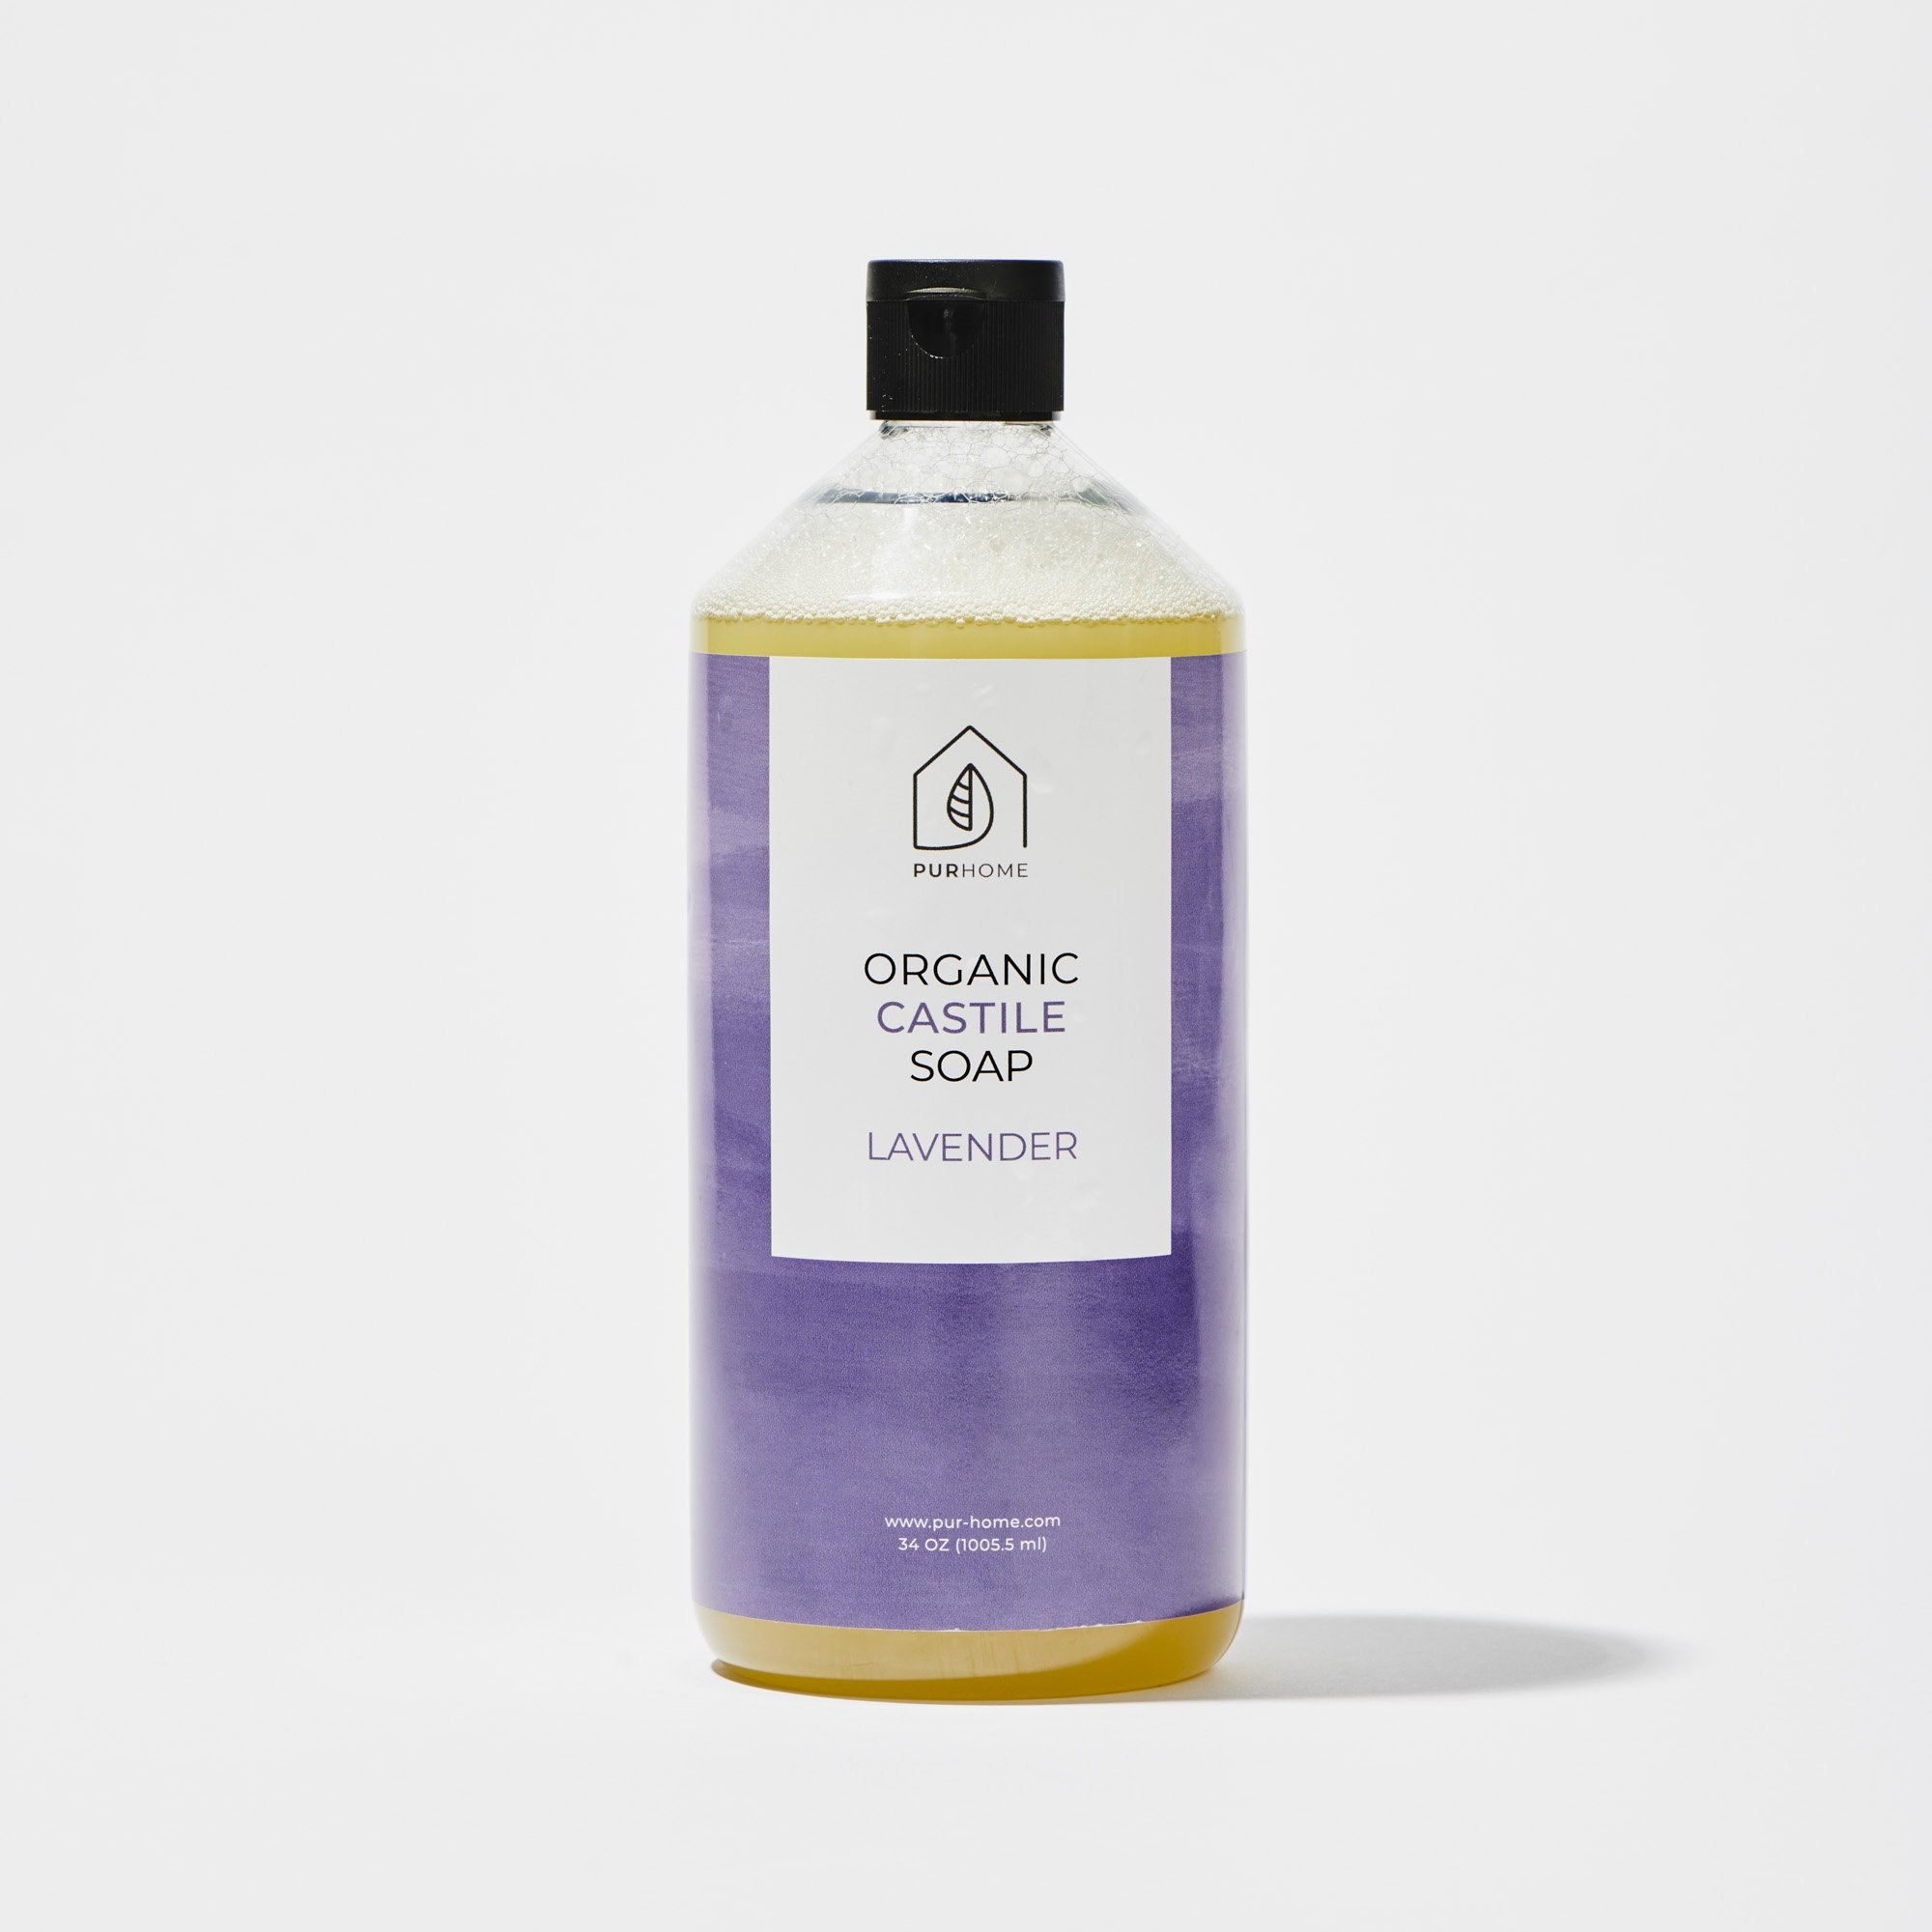 the 34-ounce bottle of organic lavender soap